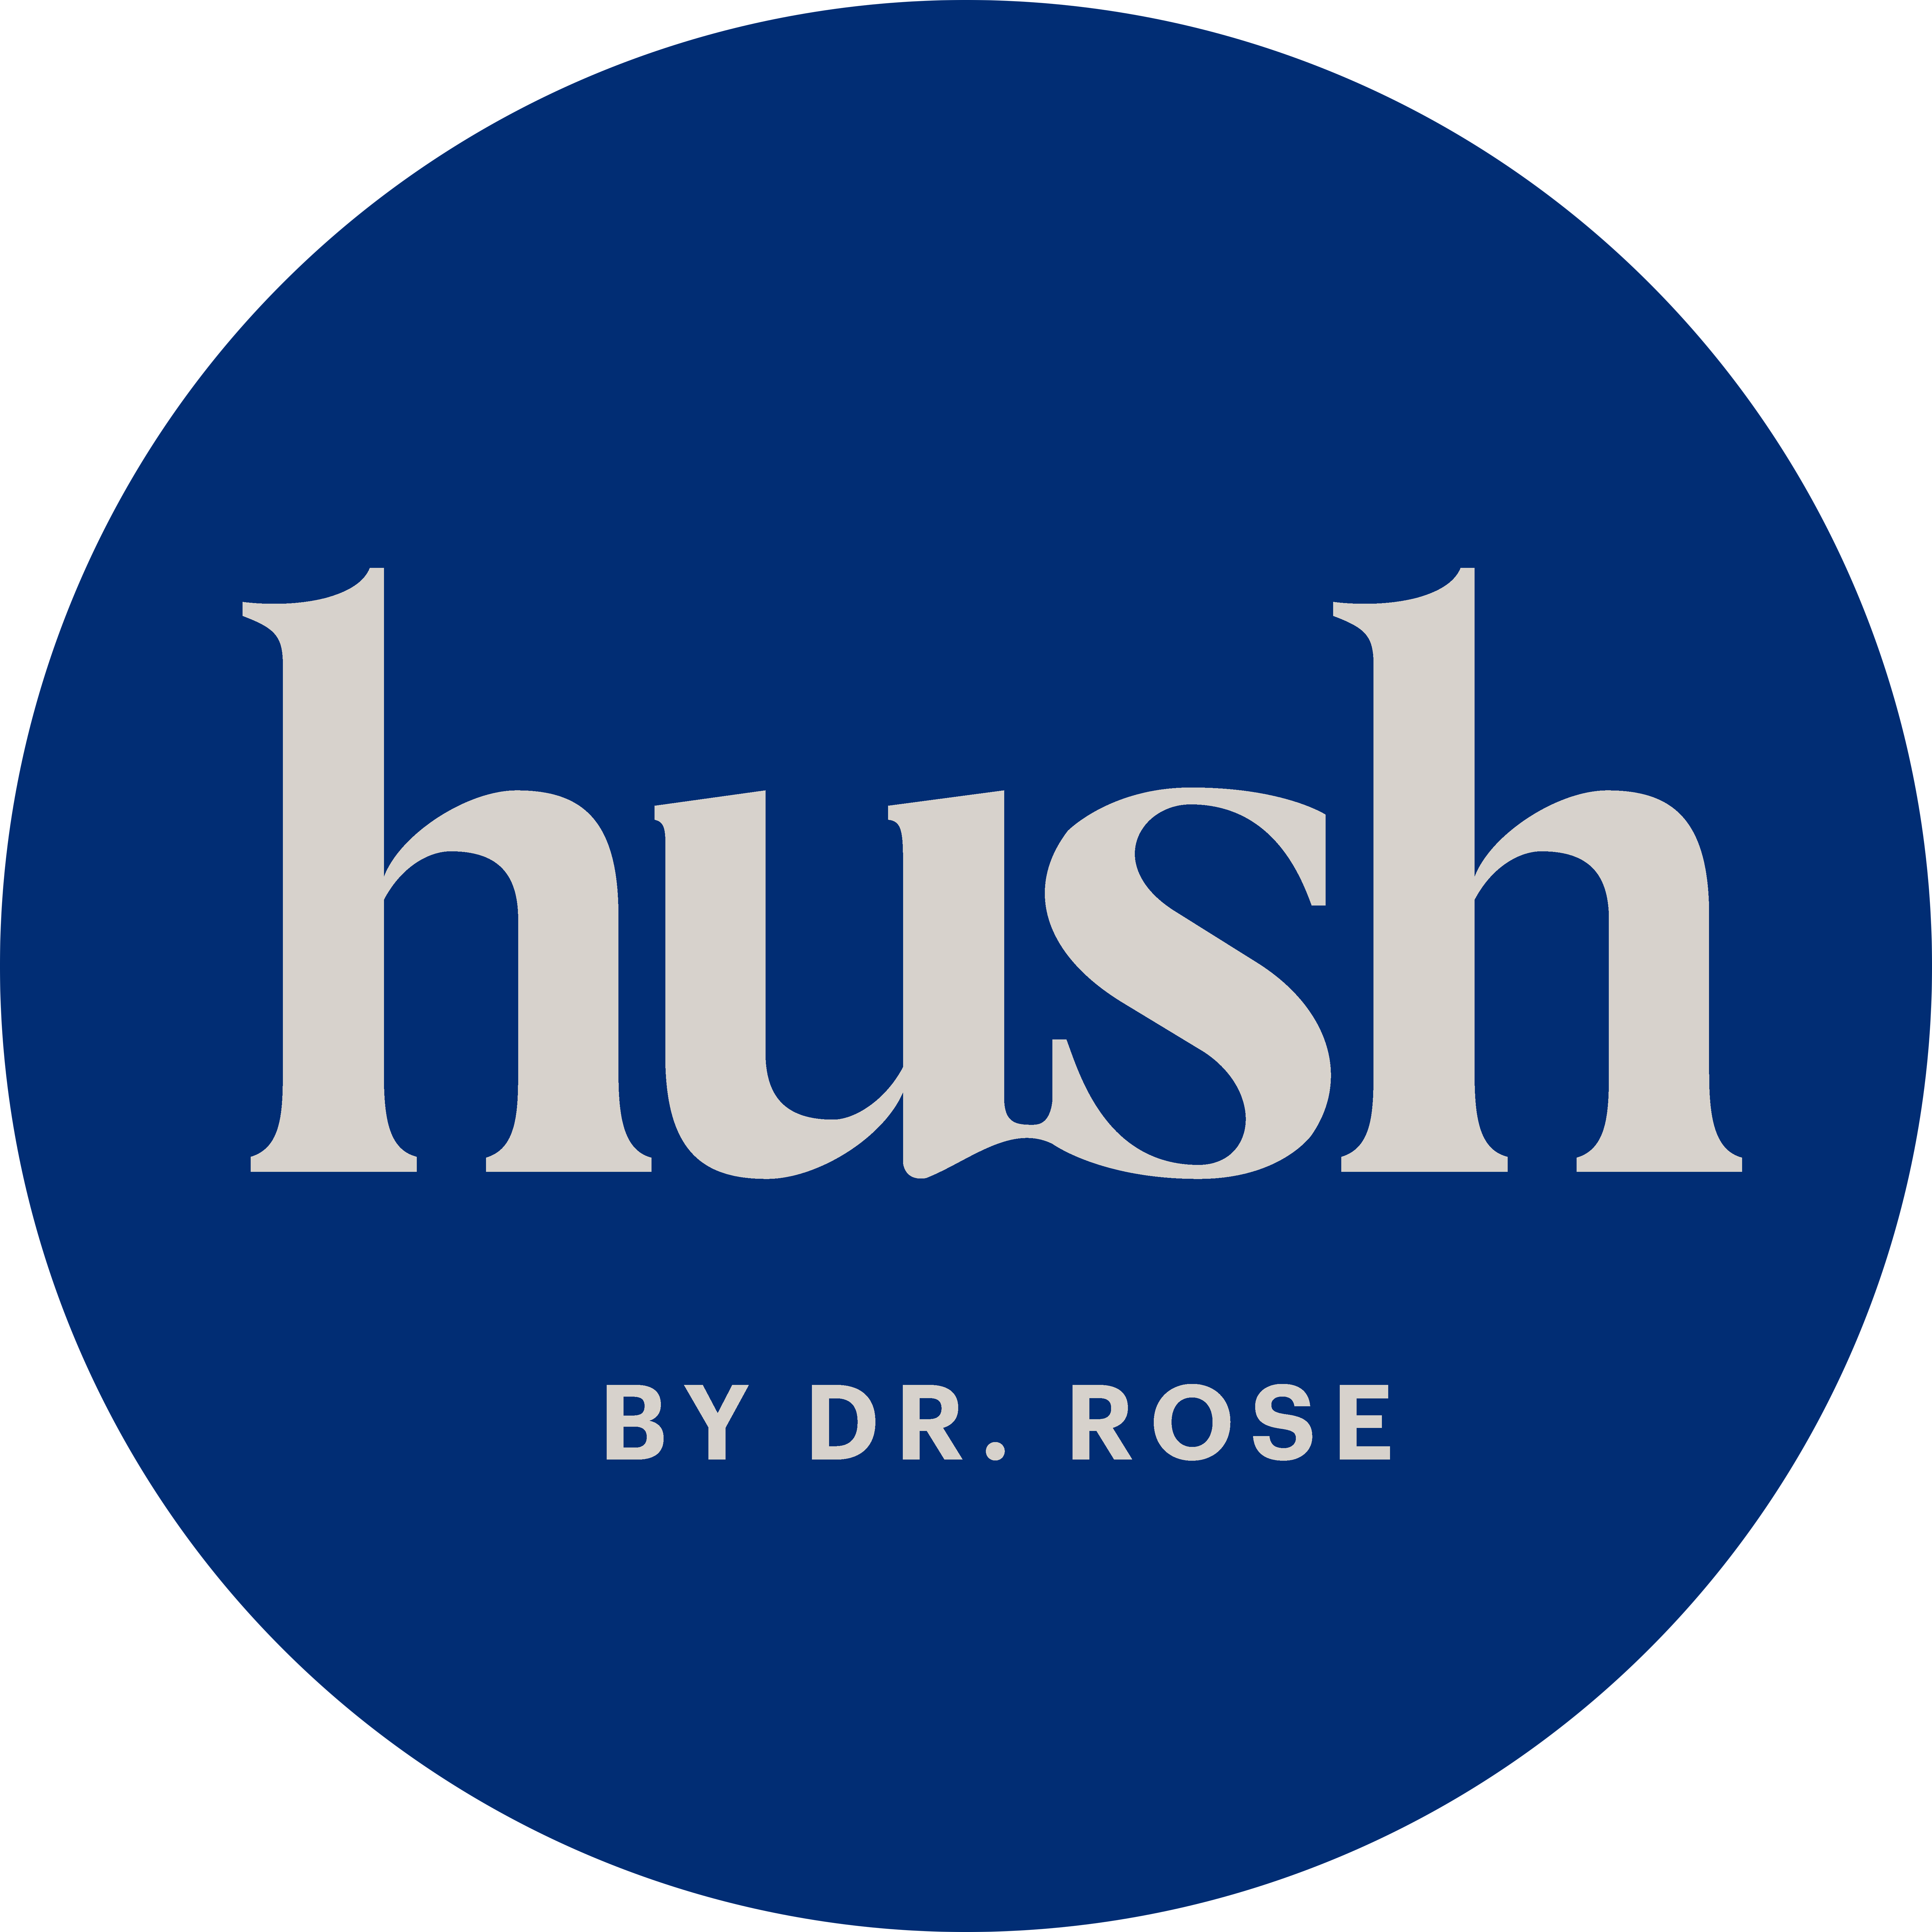 Hush by Dr. Rose